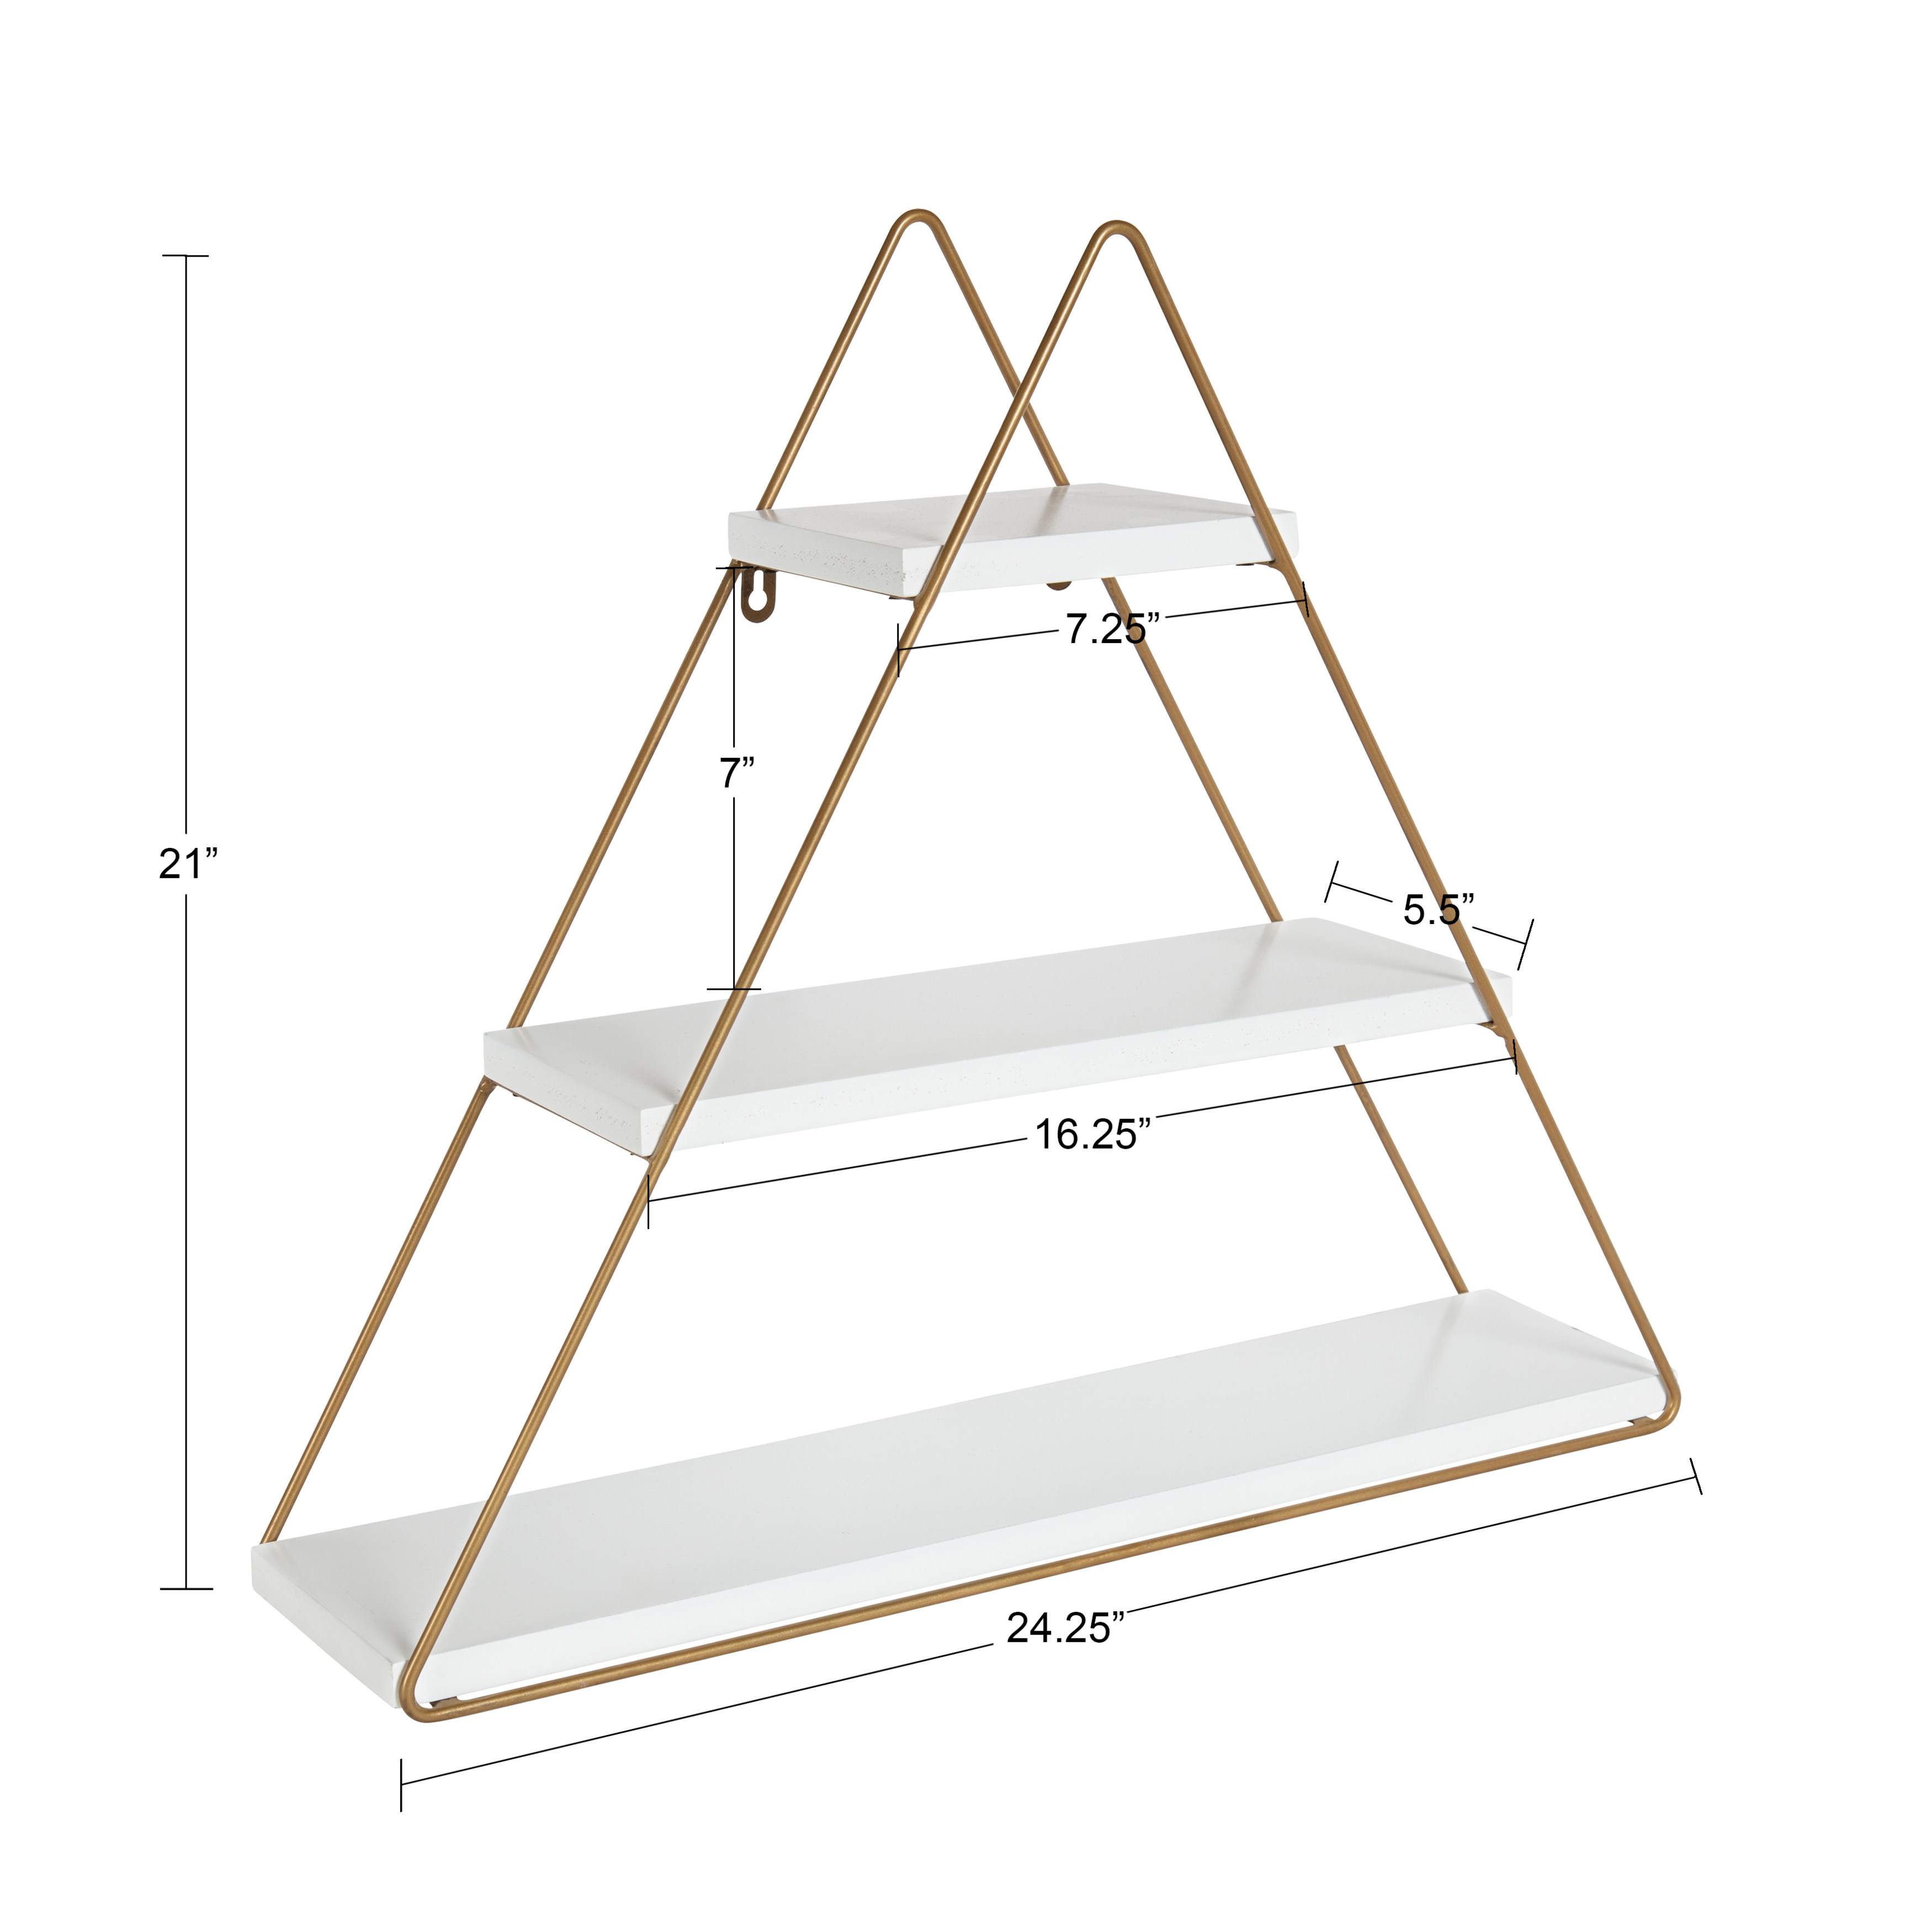 Kate and Laurel Tilde Metal Wall Shelves, 25 x 21, White and Gold, Three-Shelf Wall Organizer - image 3 of 6